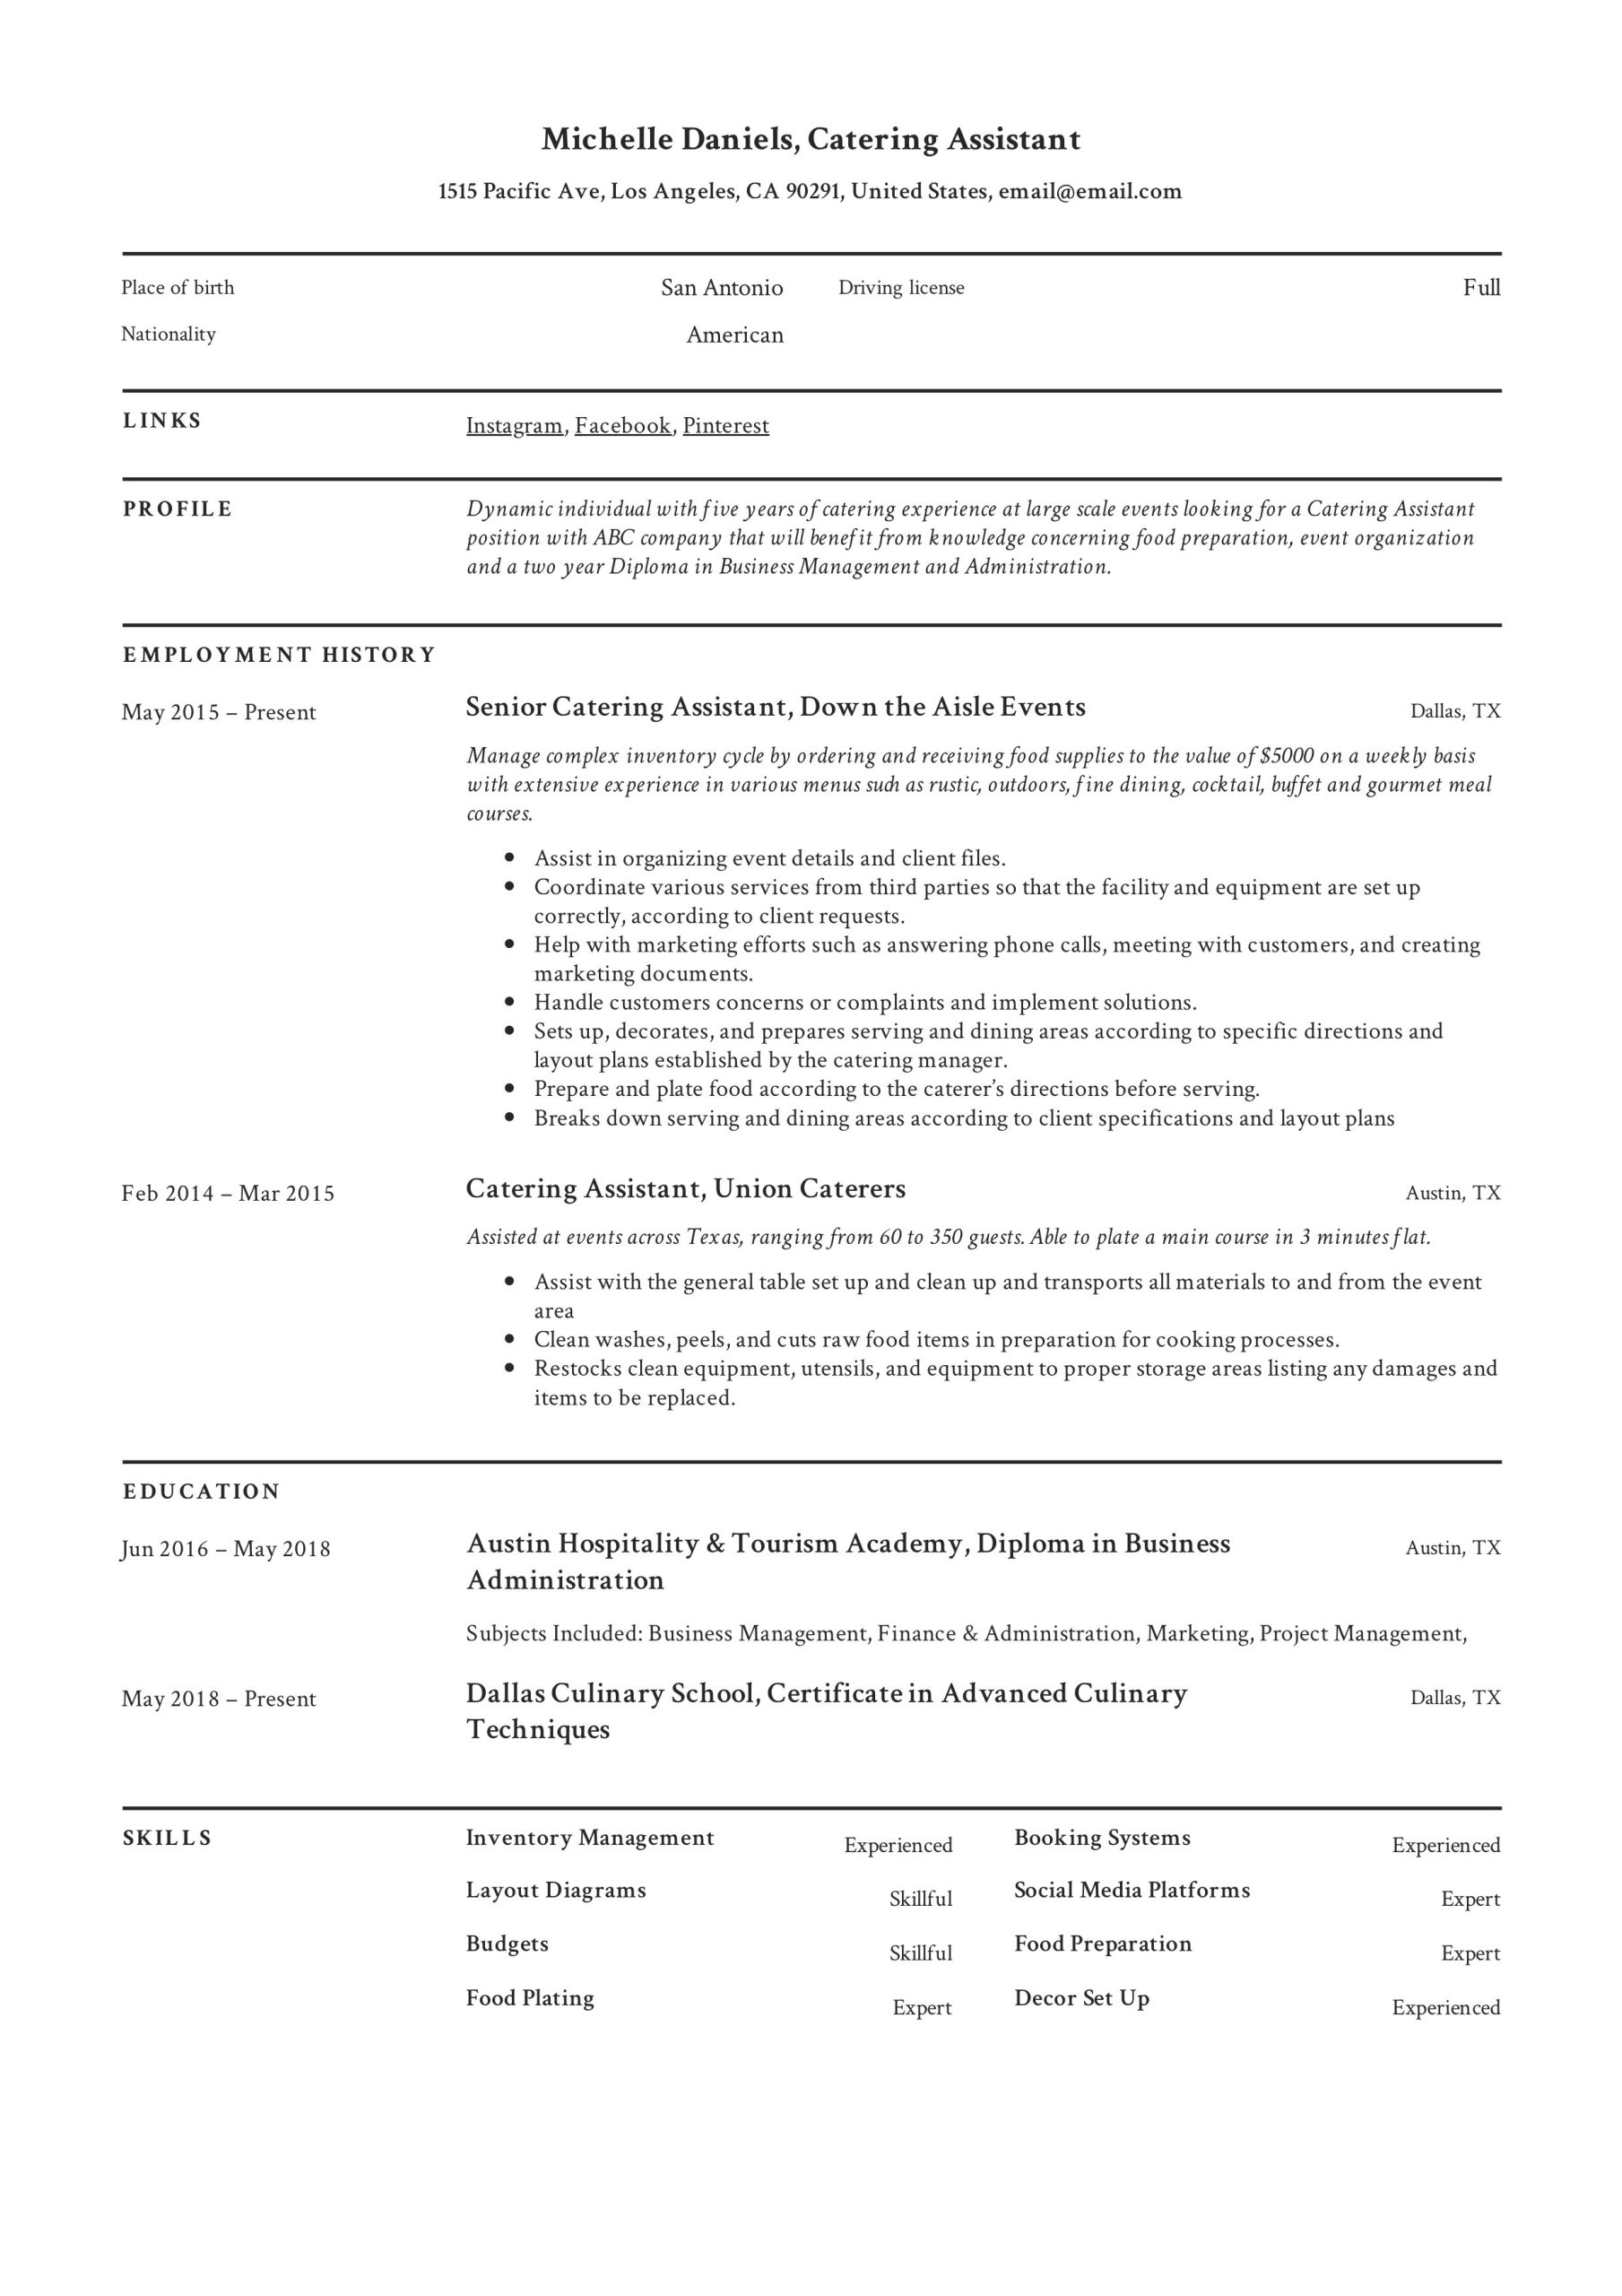 Outside Catering Sales Manager Resume Sample Guide: Catering assistant Resume [   12 Samples ] Pdf & Word 2022